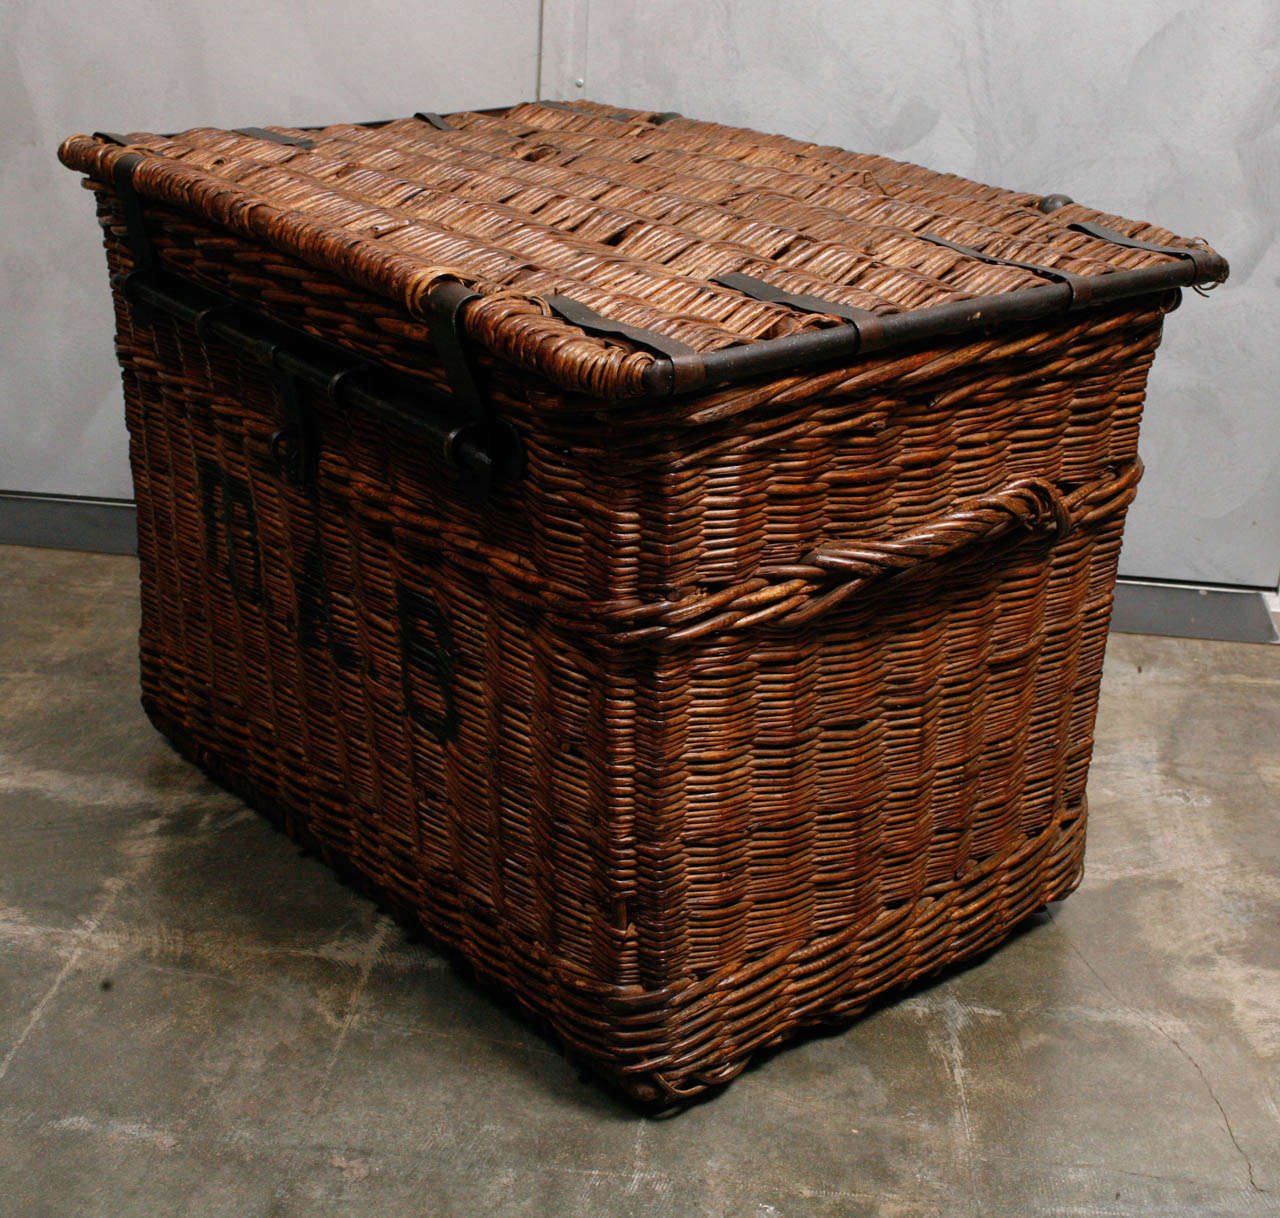 This Wicker trunk is in good condition with some really nice details. The trunk has black lettering painted on the front and Iron fittings, hinges and lock. The trunk is a great size suitable for a variety of uses and has wooden skids at the bottom